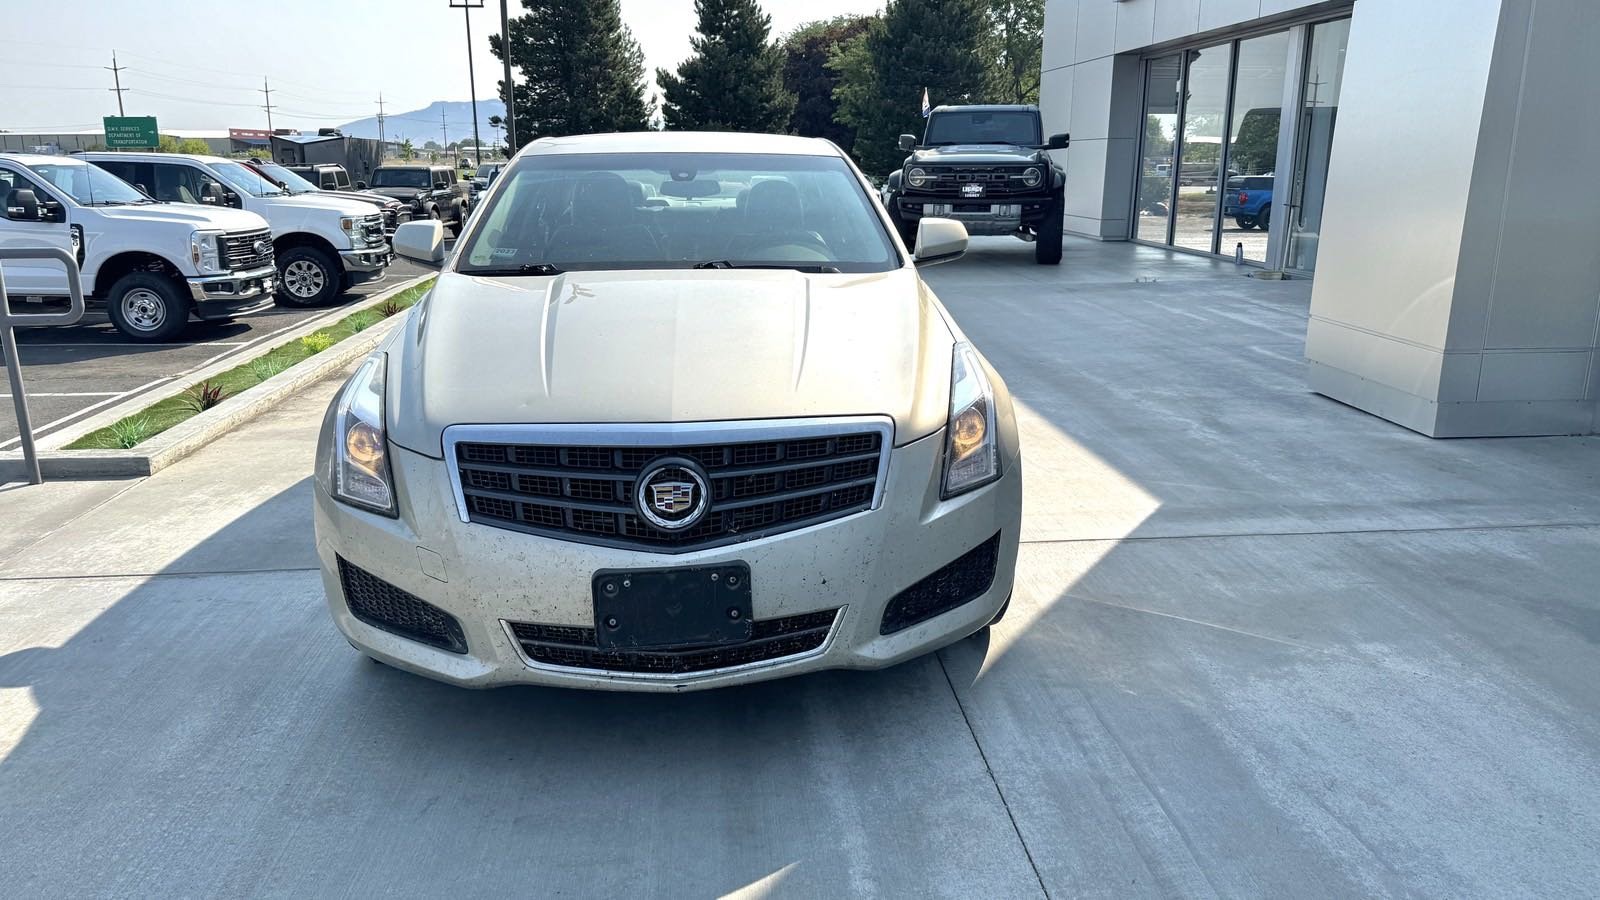 Used 2014 Cadillac ATS Standard with VIN 1G6AA5RA7E0101752 for sale in La Grande, OR